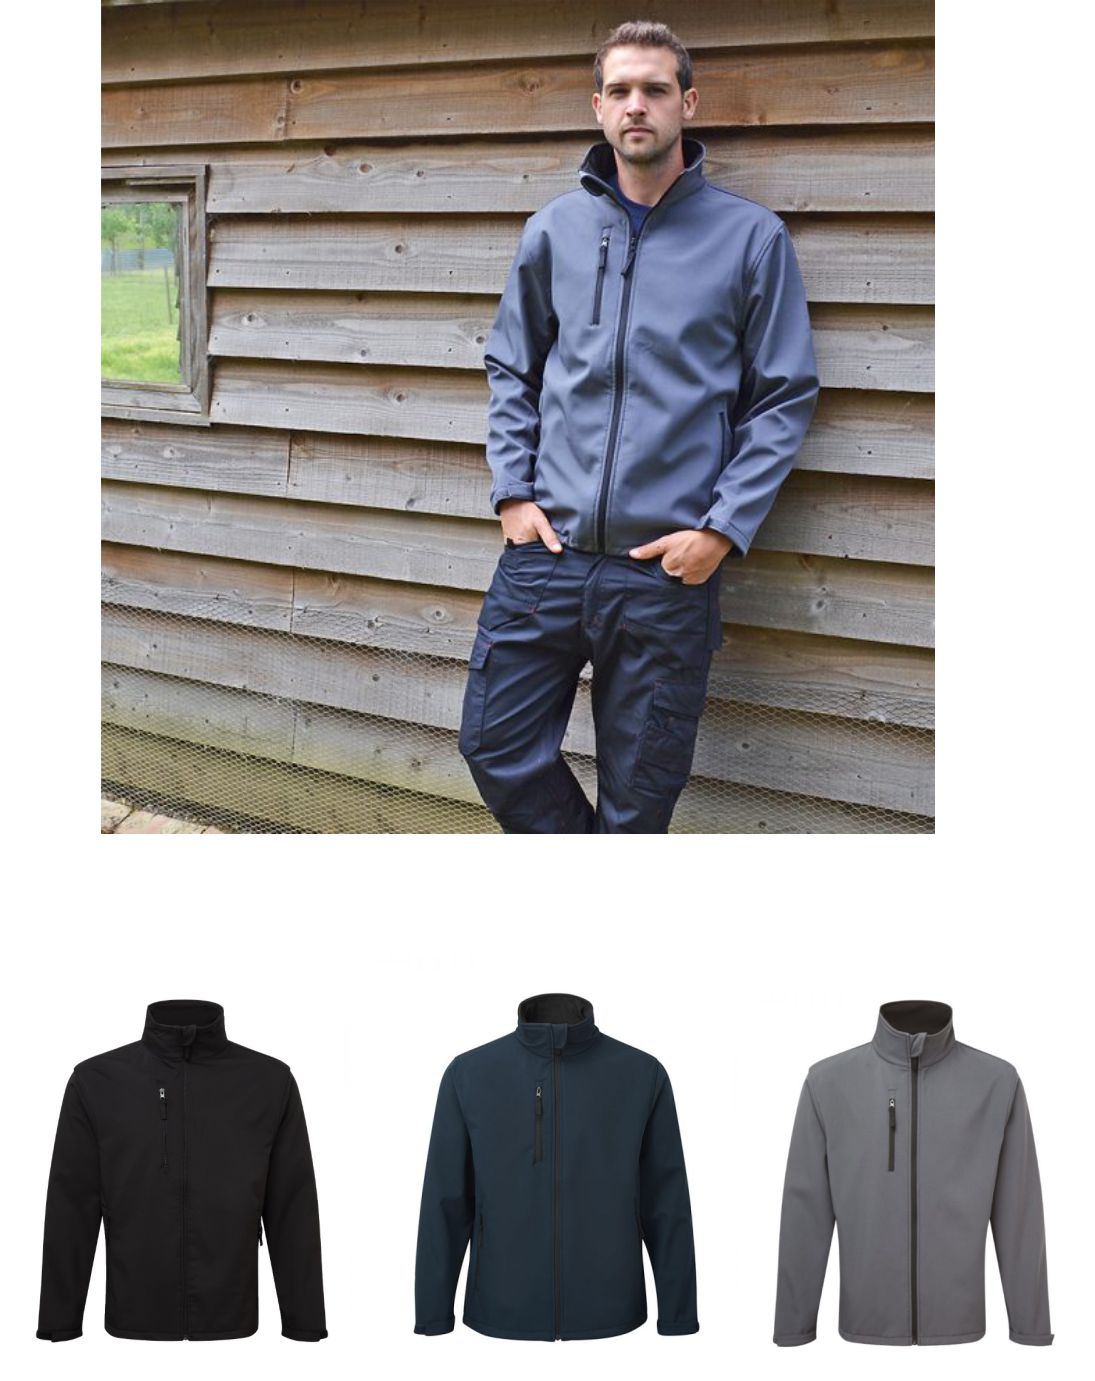 Fort 204 Selkirk Jacket - Click Image to Close